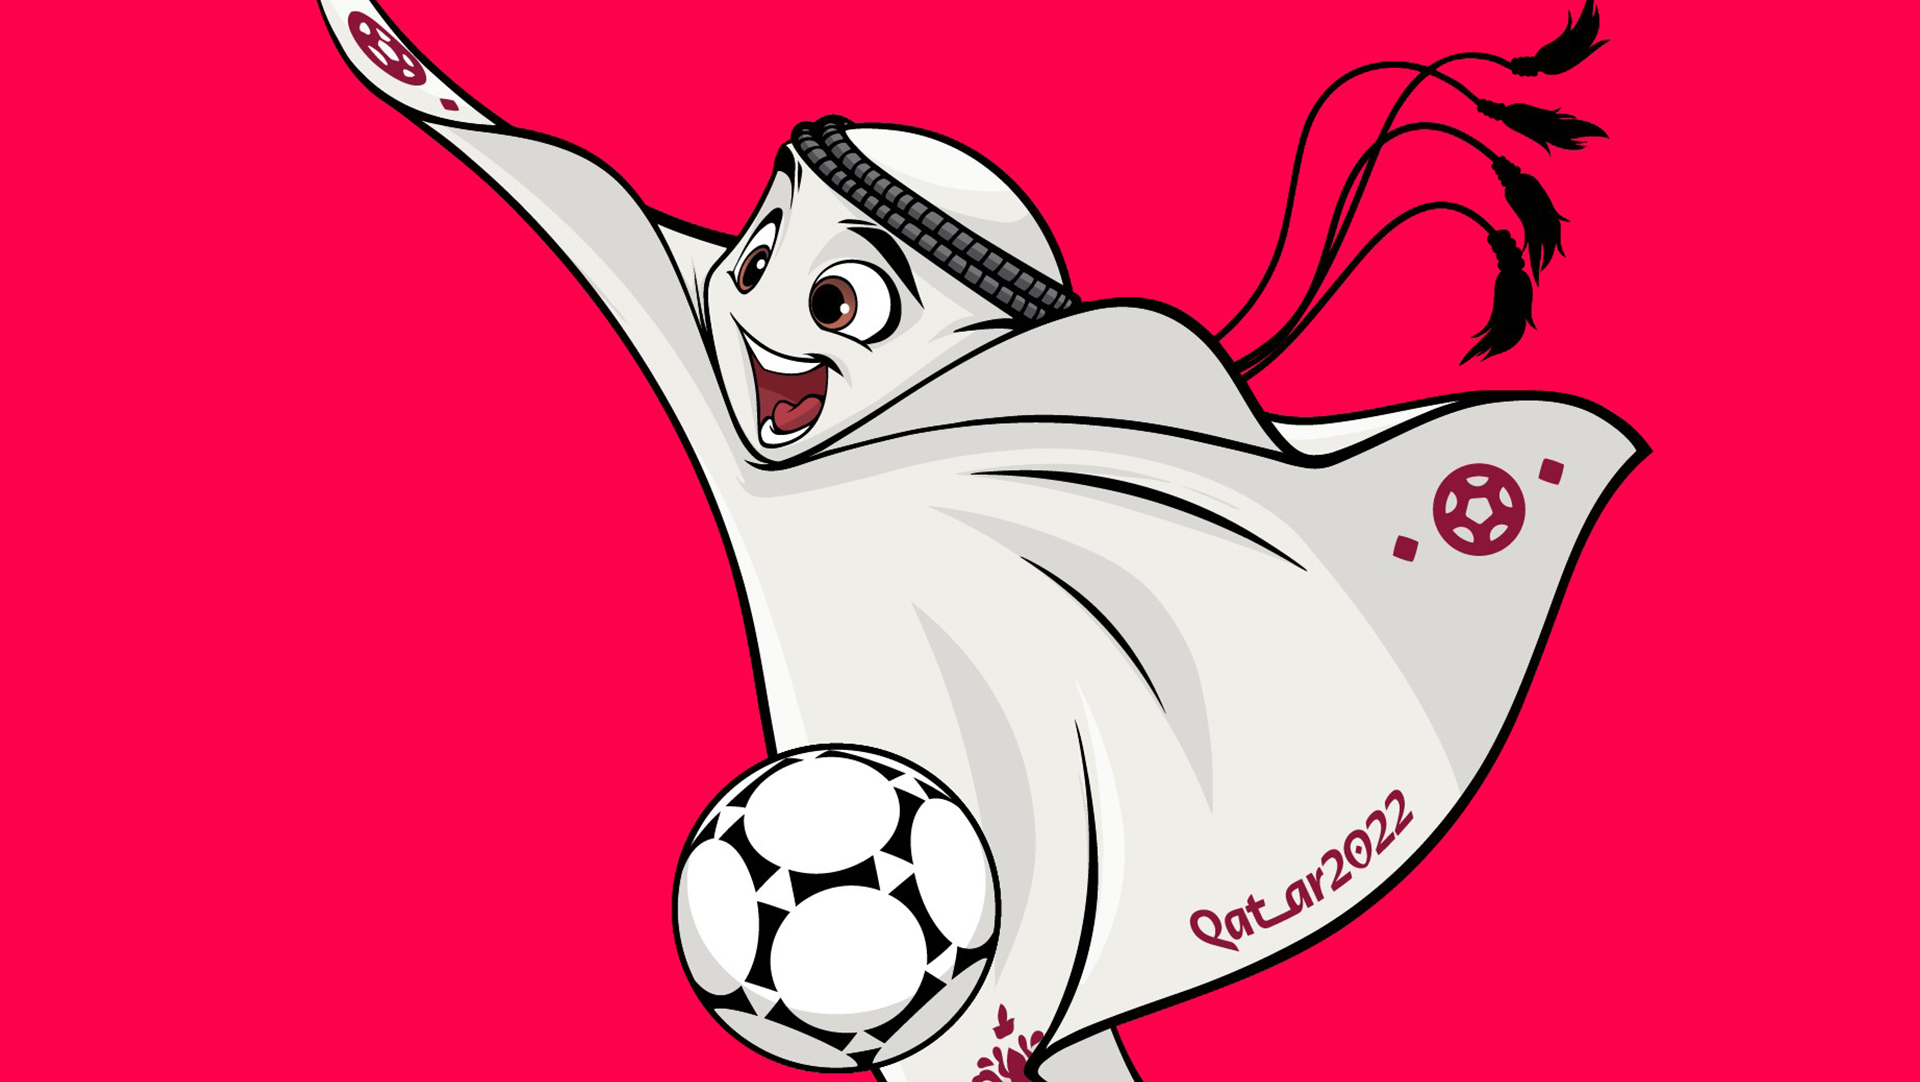 Am I the only one who doesn't hate the new Fifa World Cup mascot? |  Creative Bloq